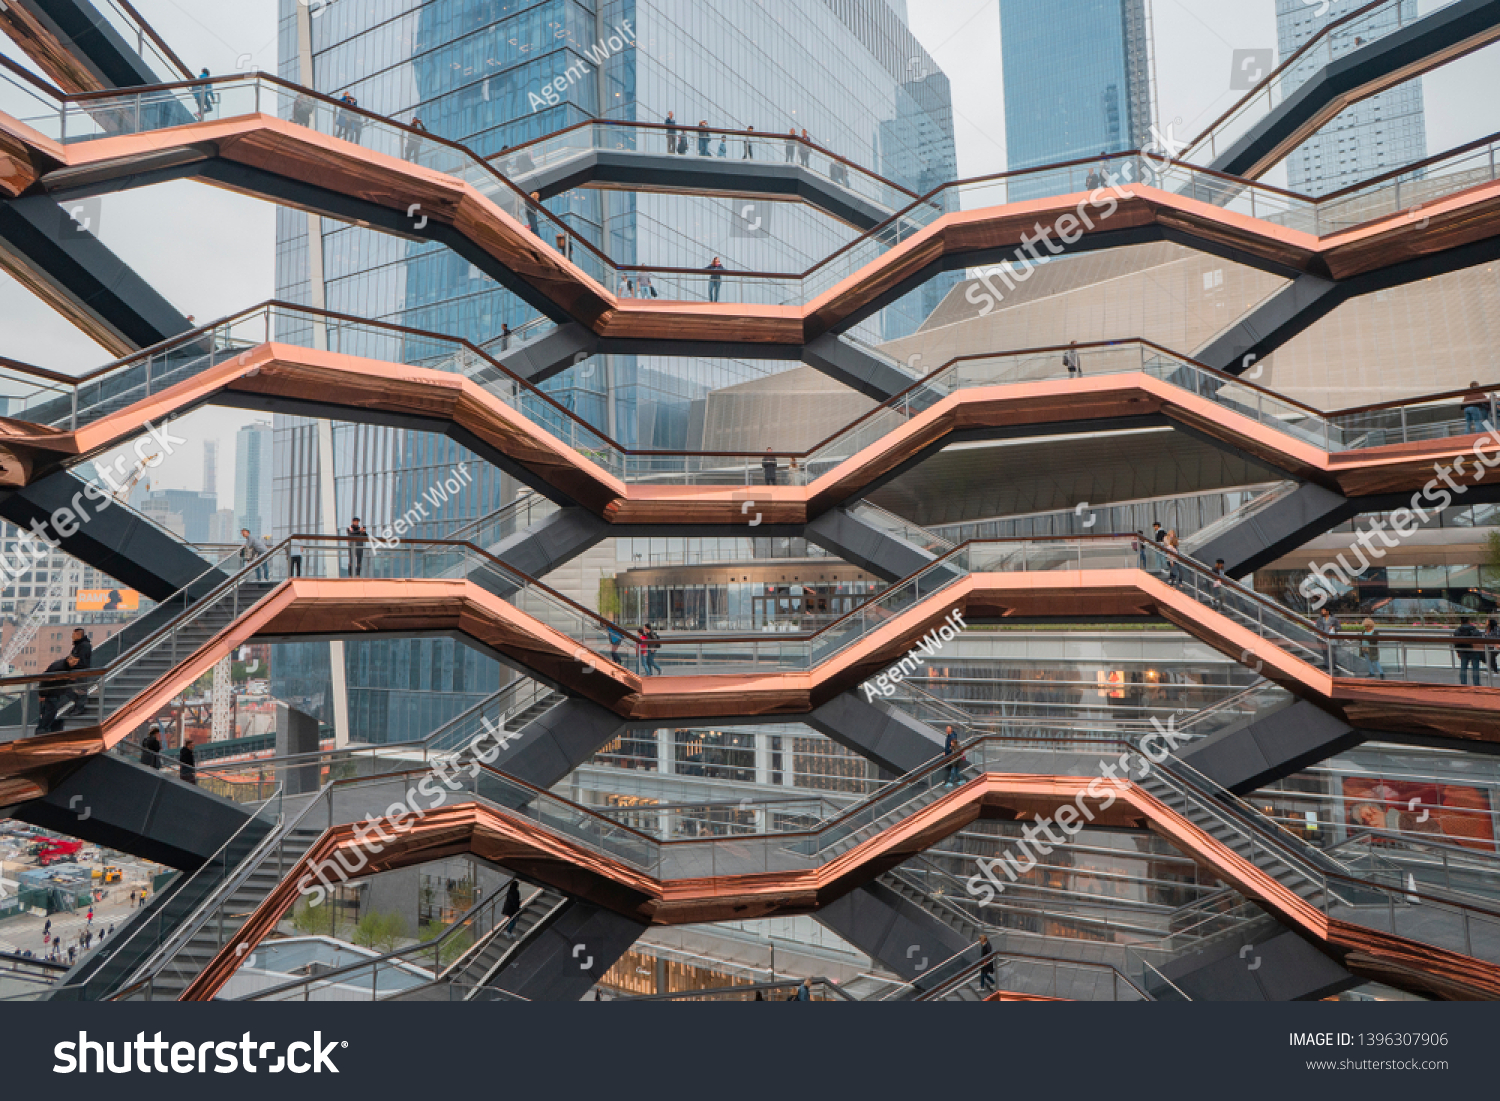 New York, USA - May 2, 2019: the Vessel is 154 intricately interconnecting flights of stairs inspired by the stepwells of India. It will be the centerpiece of the Hudson Yards. It is privately owned.  #1396307906